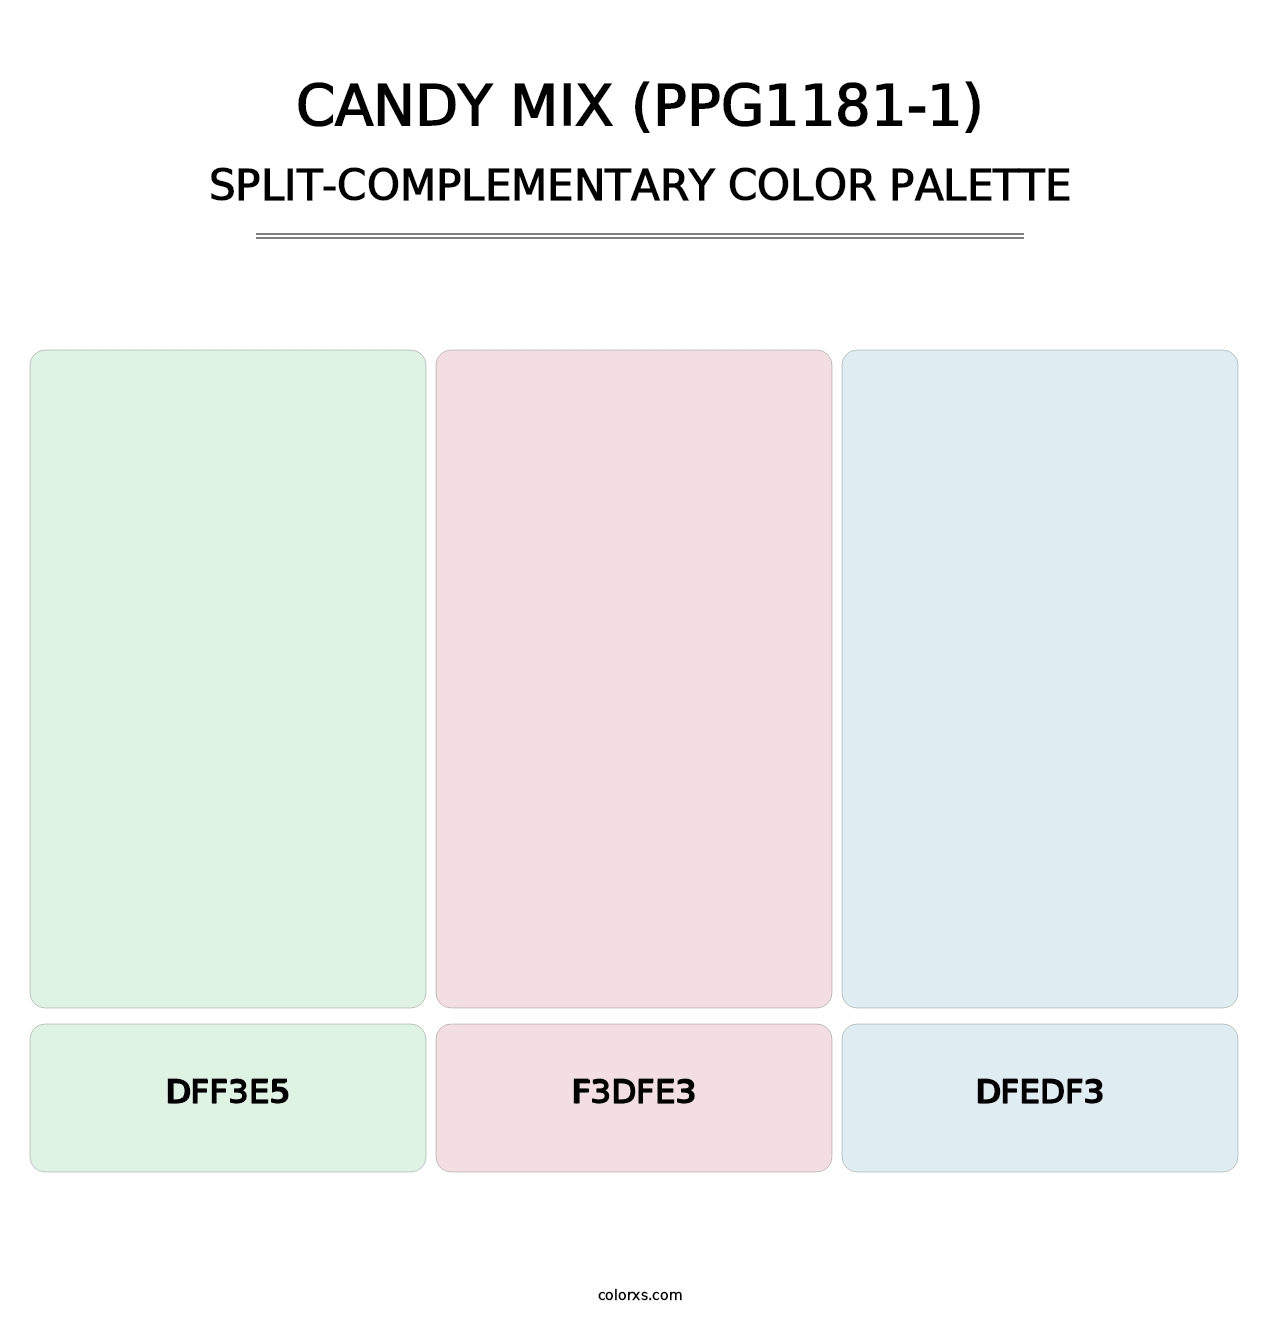 Candy Mix (PPG1181-1) - Split-Complementary Color Palette